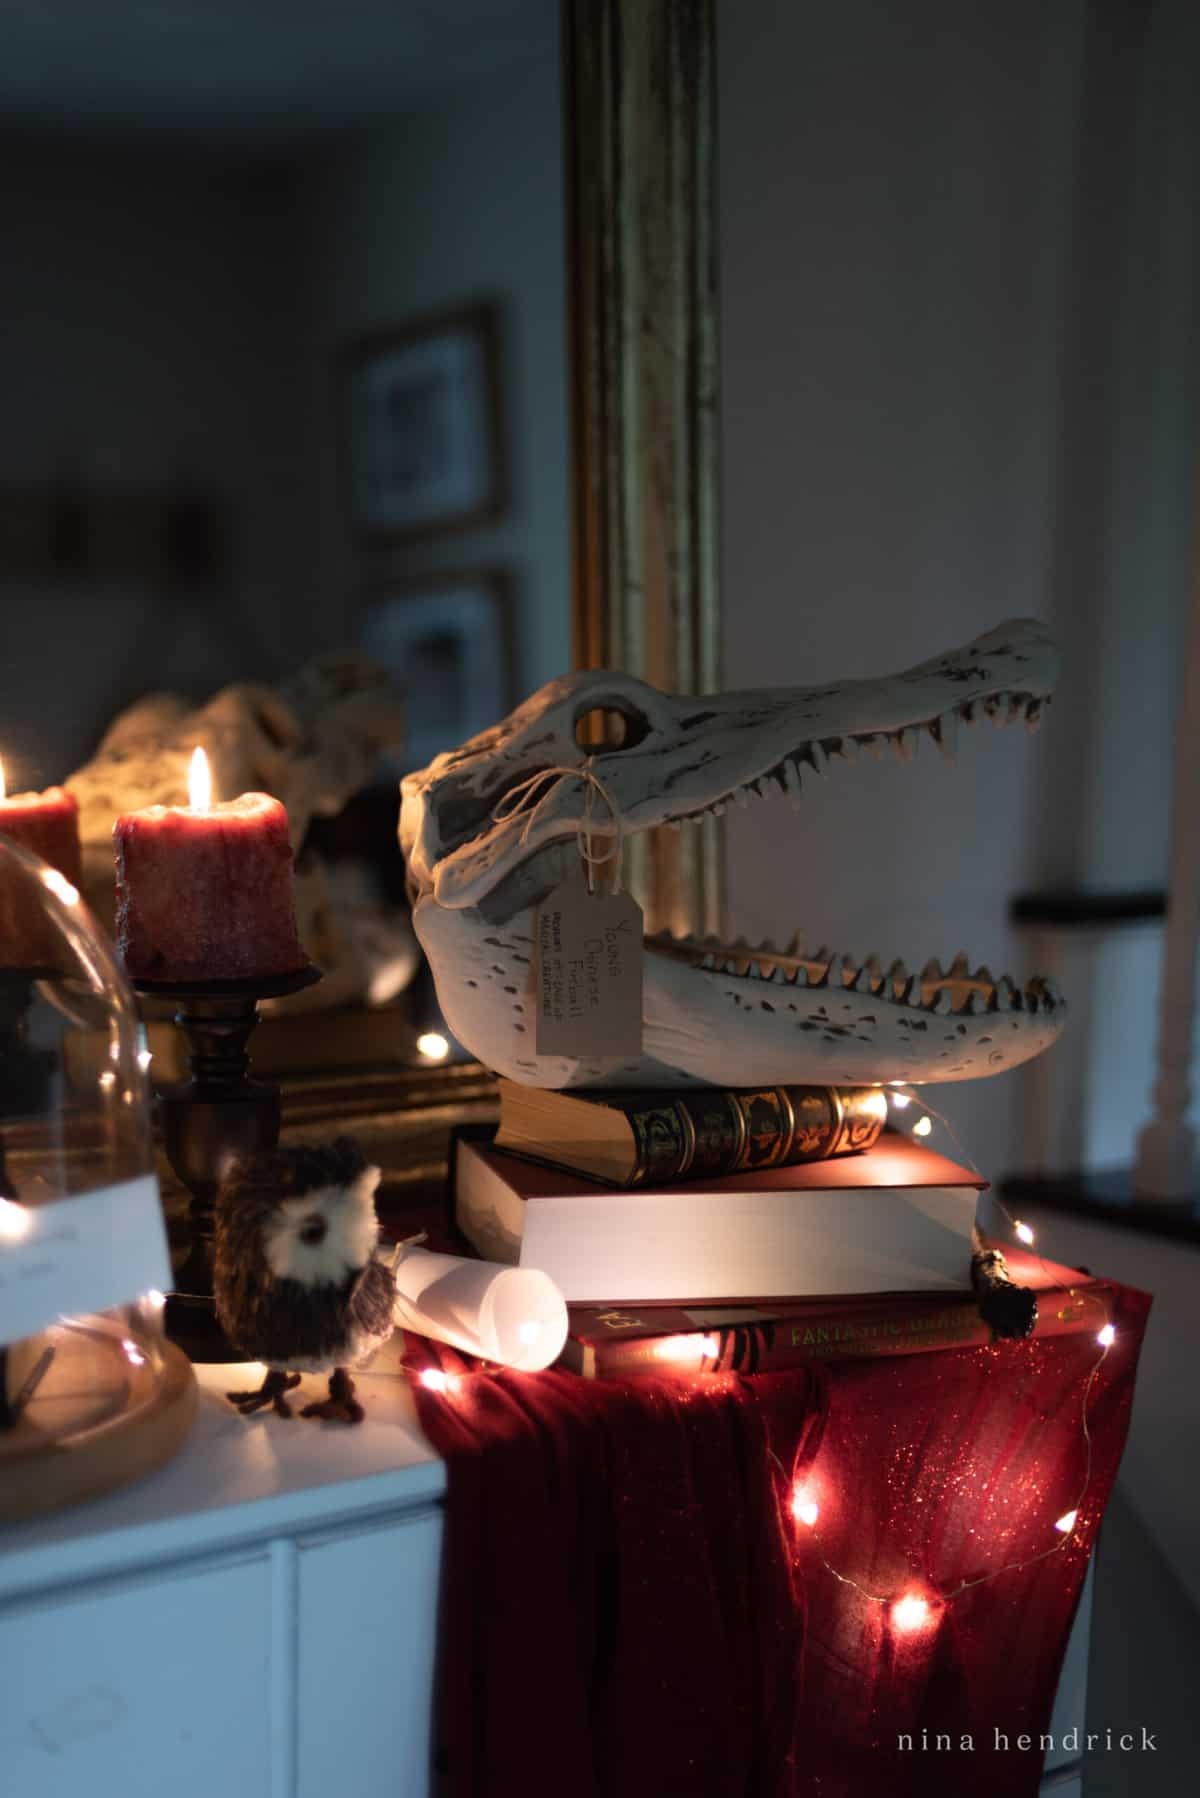 Get spooky this Halloween with a table adorned with books, candles, and a crocodile skull. Perfect for your haunted house or Halloween party, this eerie centerpiece is sure to impress guests and set